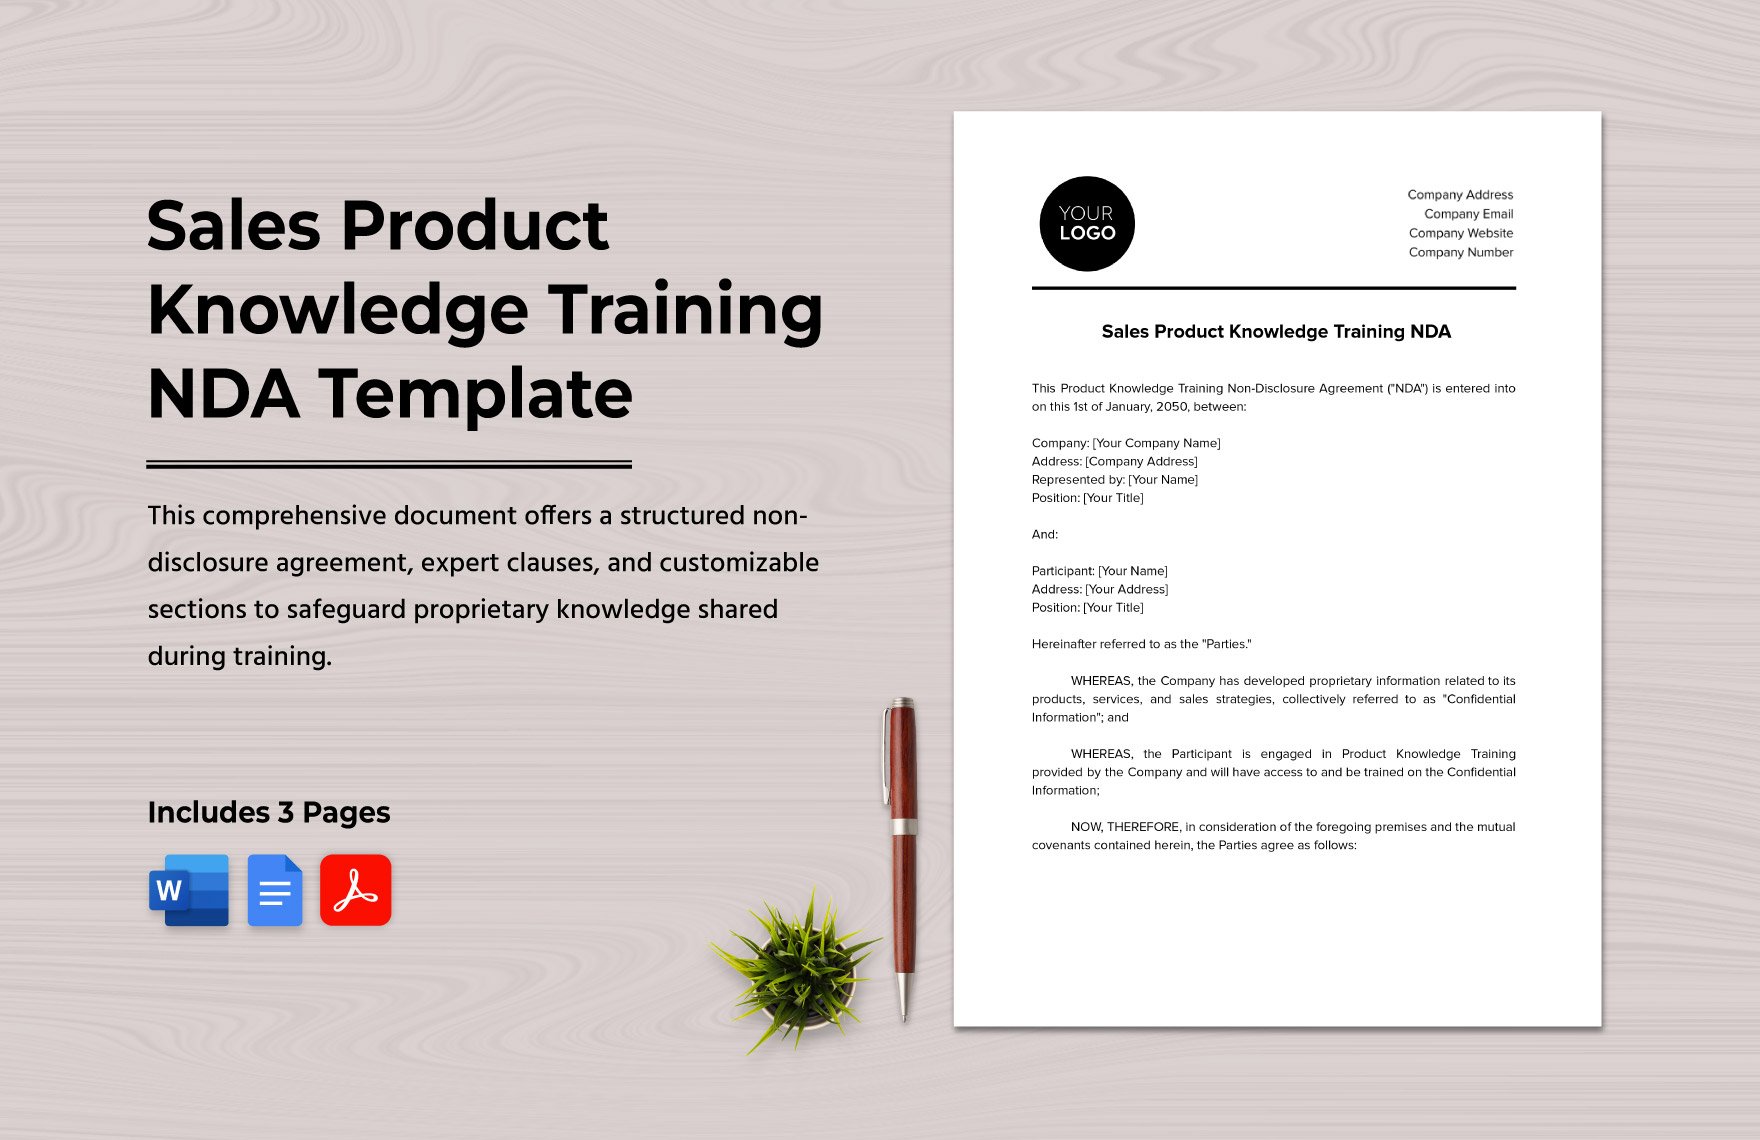 Sales Product Knowledge Training NDA Template in Word, Google Docs, PDF